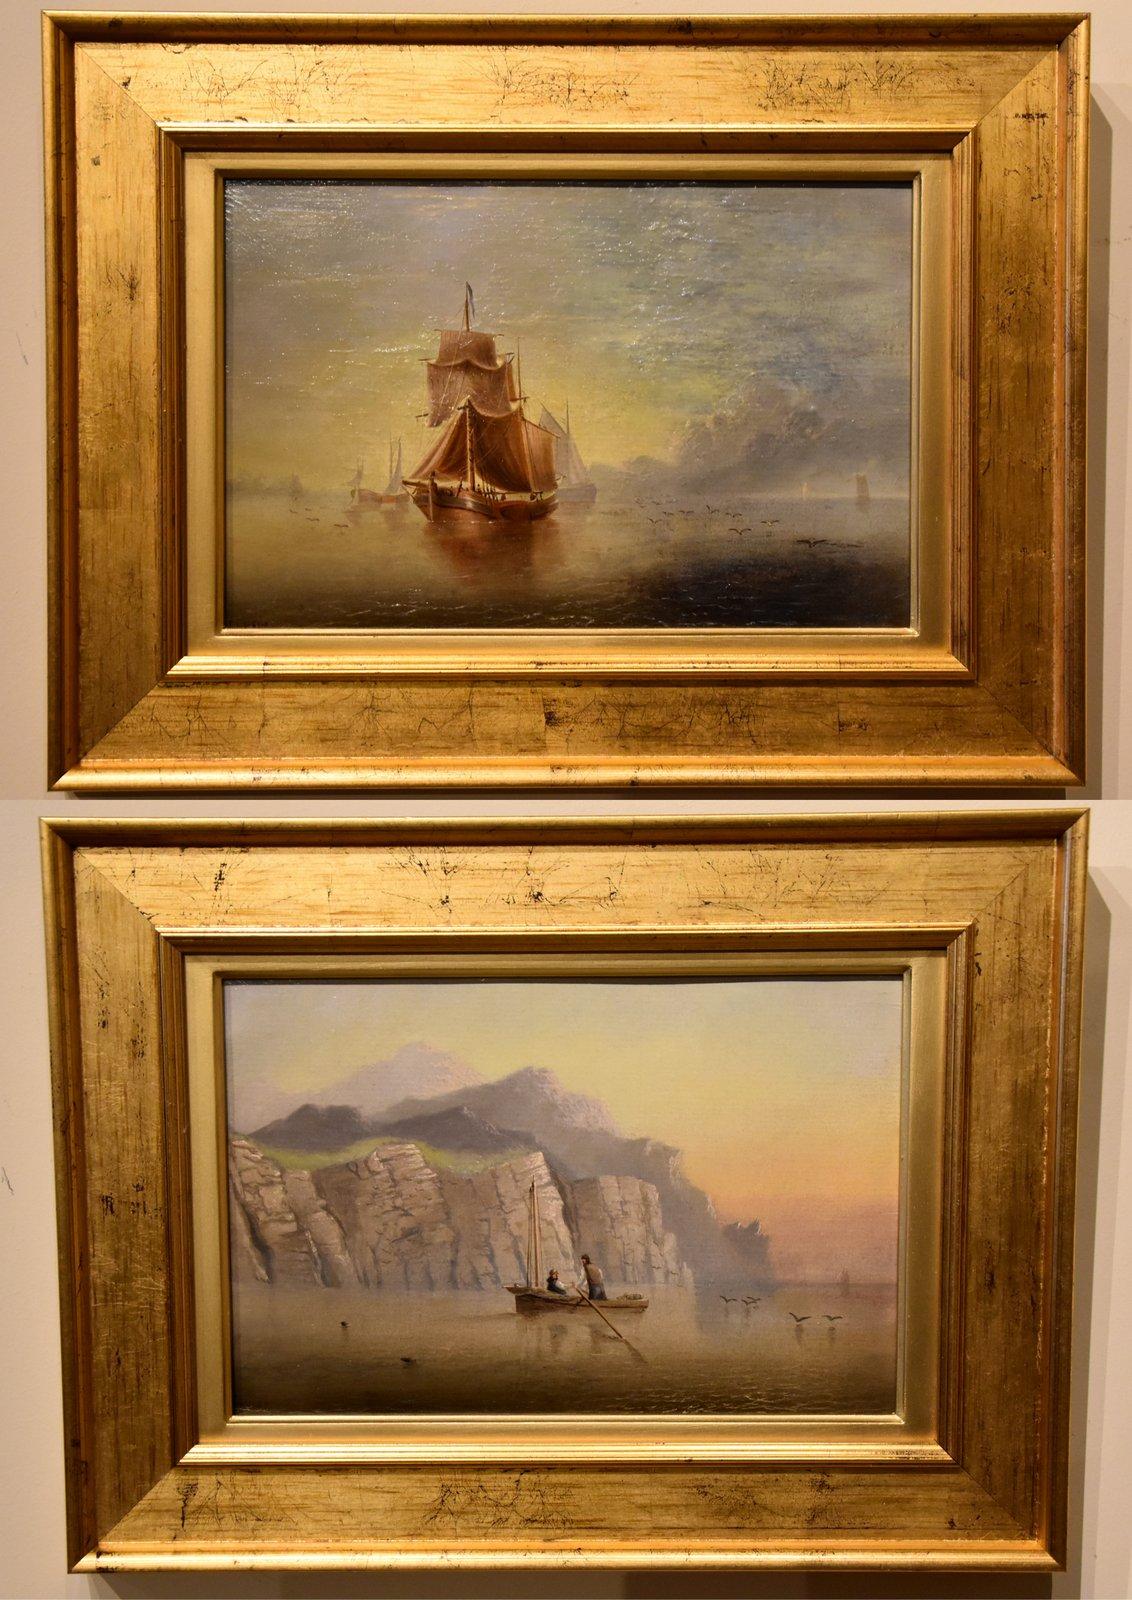 Oil Painting Pair by Thomas Lucop "Evening off the North East Coast" 1834- 1911 A Hull master who was a friend and painting companion of Henry Redmore. Both Oil on Board. Signed. 

Dimensions unframed 8x 12inches
Dimensions framed 13x 17inches

All